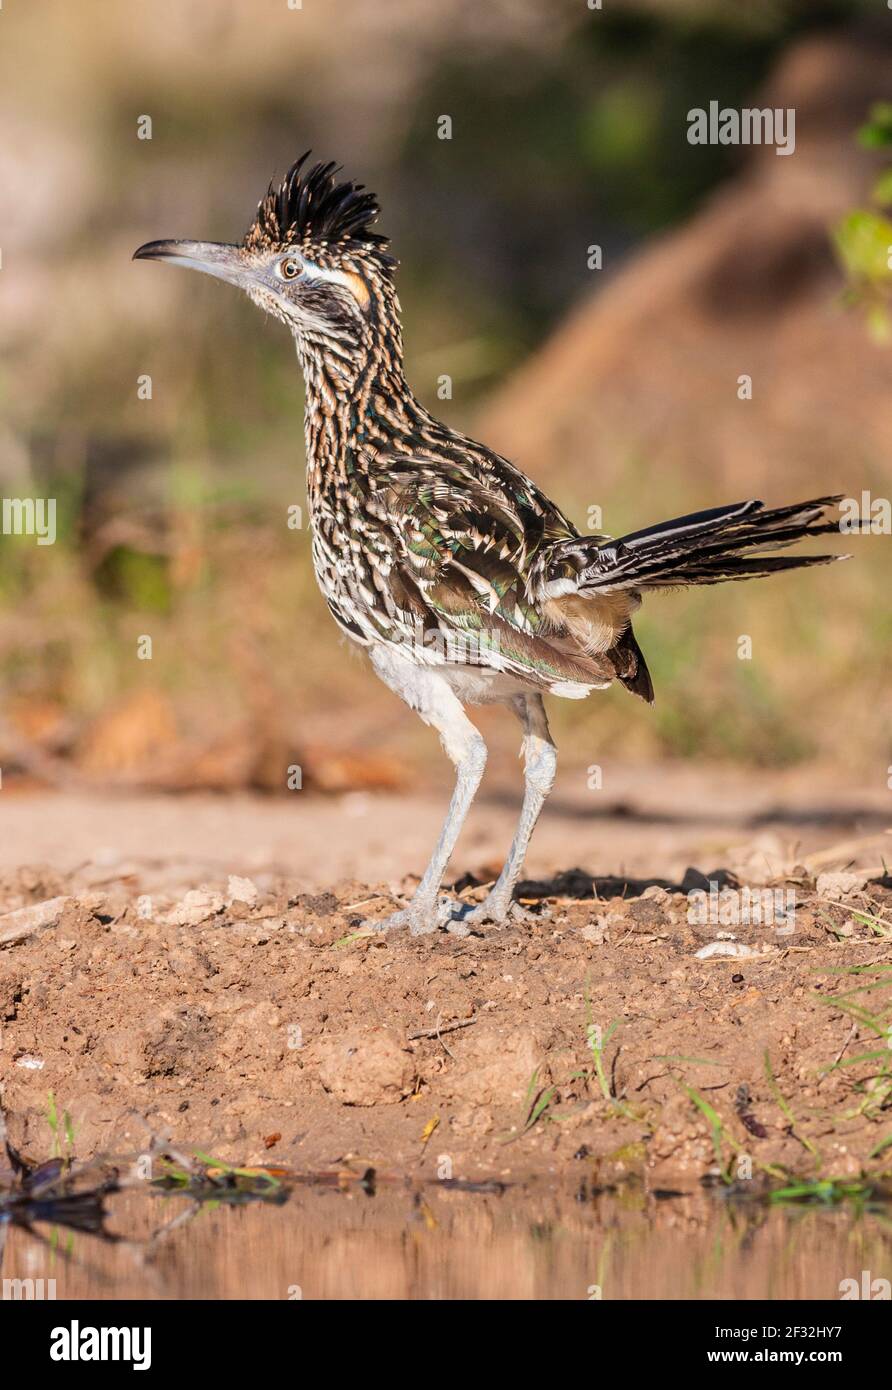 Greater Roadrunner, Geococcyx californianus, a long-legged bird in the cuckoo family, looking for water and relief from summer heat, on a ranch in Sou Stock Photo